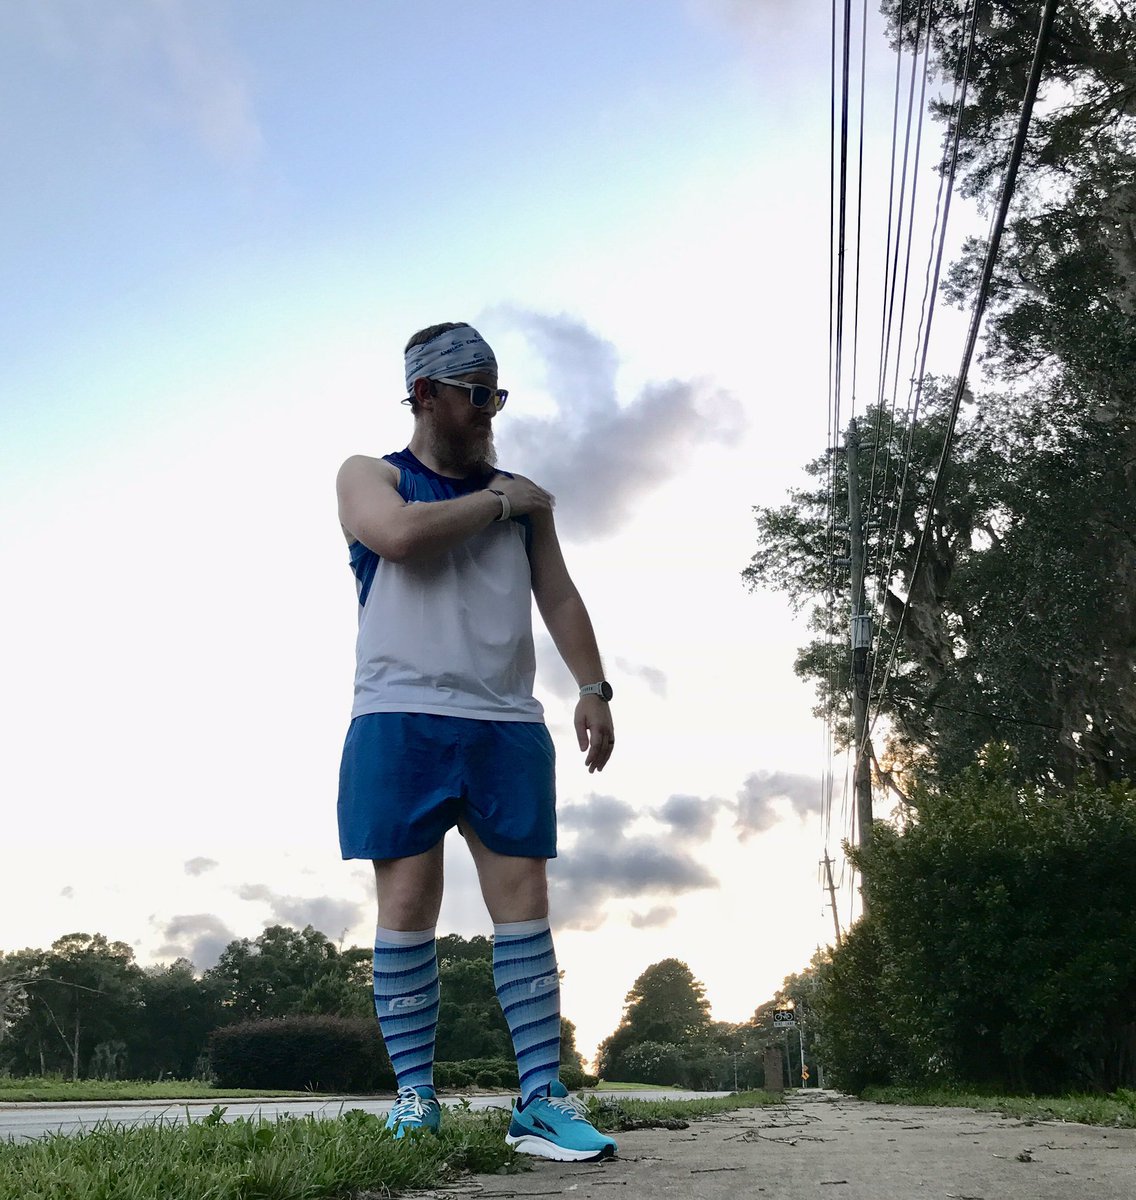 Brushing off the Tuesday blues. Maybe picking up a guardian angel?

5K.

#IStandWithYou #Fitness #teamnuun #HSHive #PROAlumni #SquirrelsNutButter #TeamROADiD #TeamULTRA #JoyWins #ULTRAJoy #BeatYesterday #LeagueOfGarmin #RunChat #WeRunSocial #IHeartTally